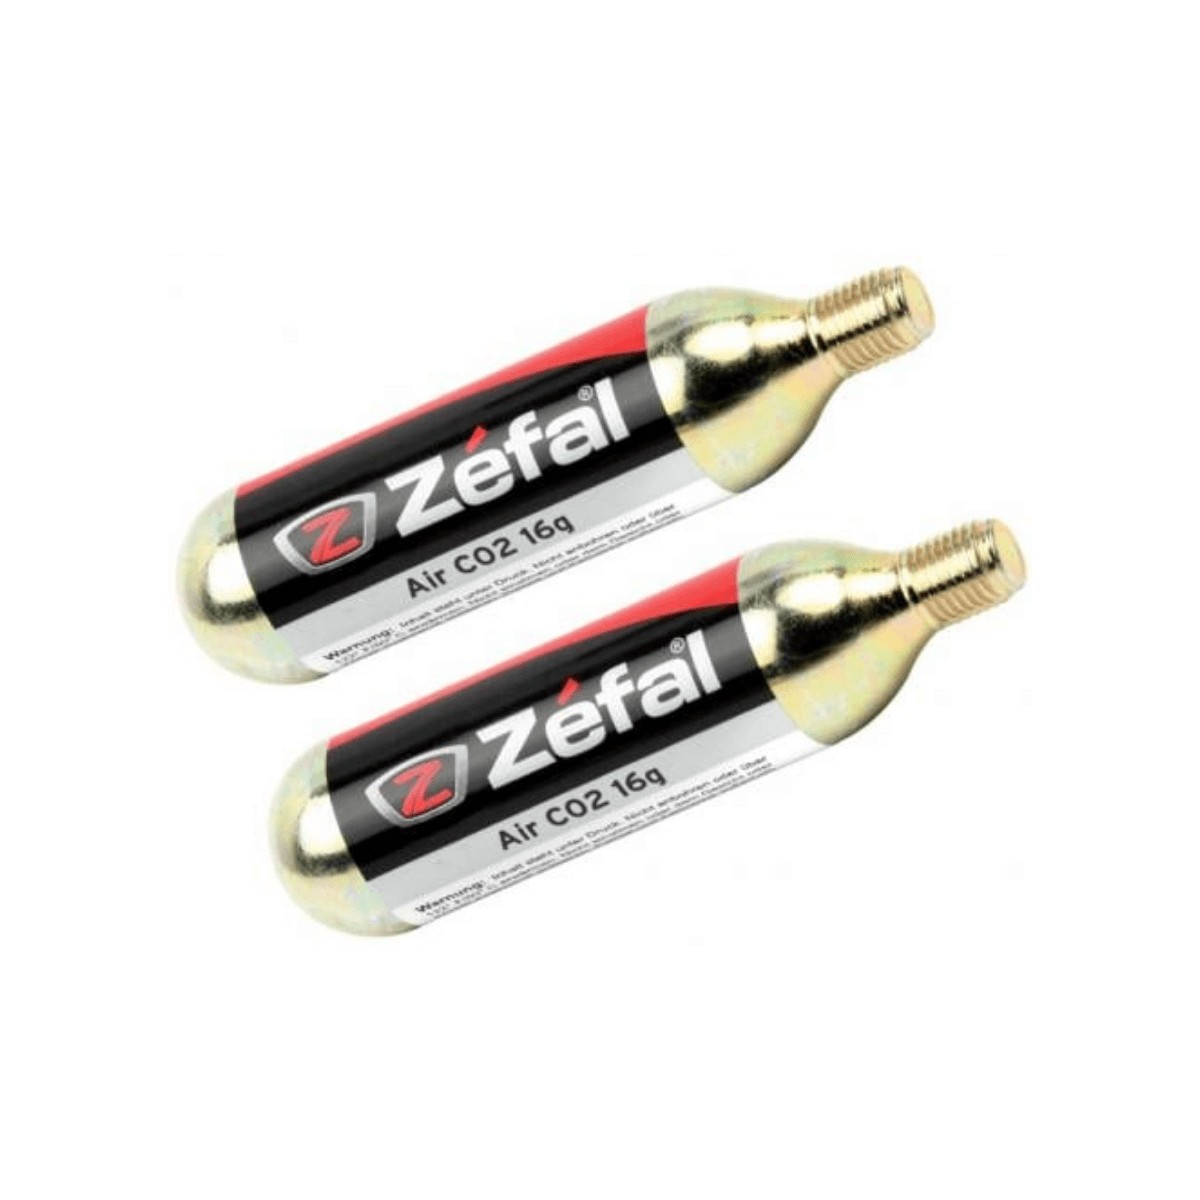 Zefal CO2 16g Compressed Air Cartridge Thread (2 units)